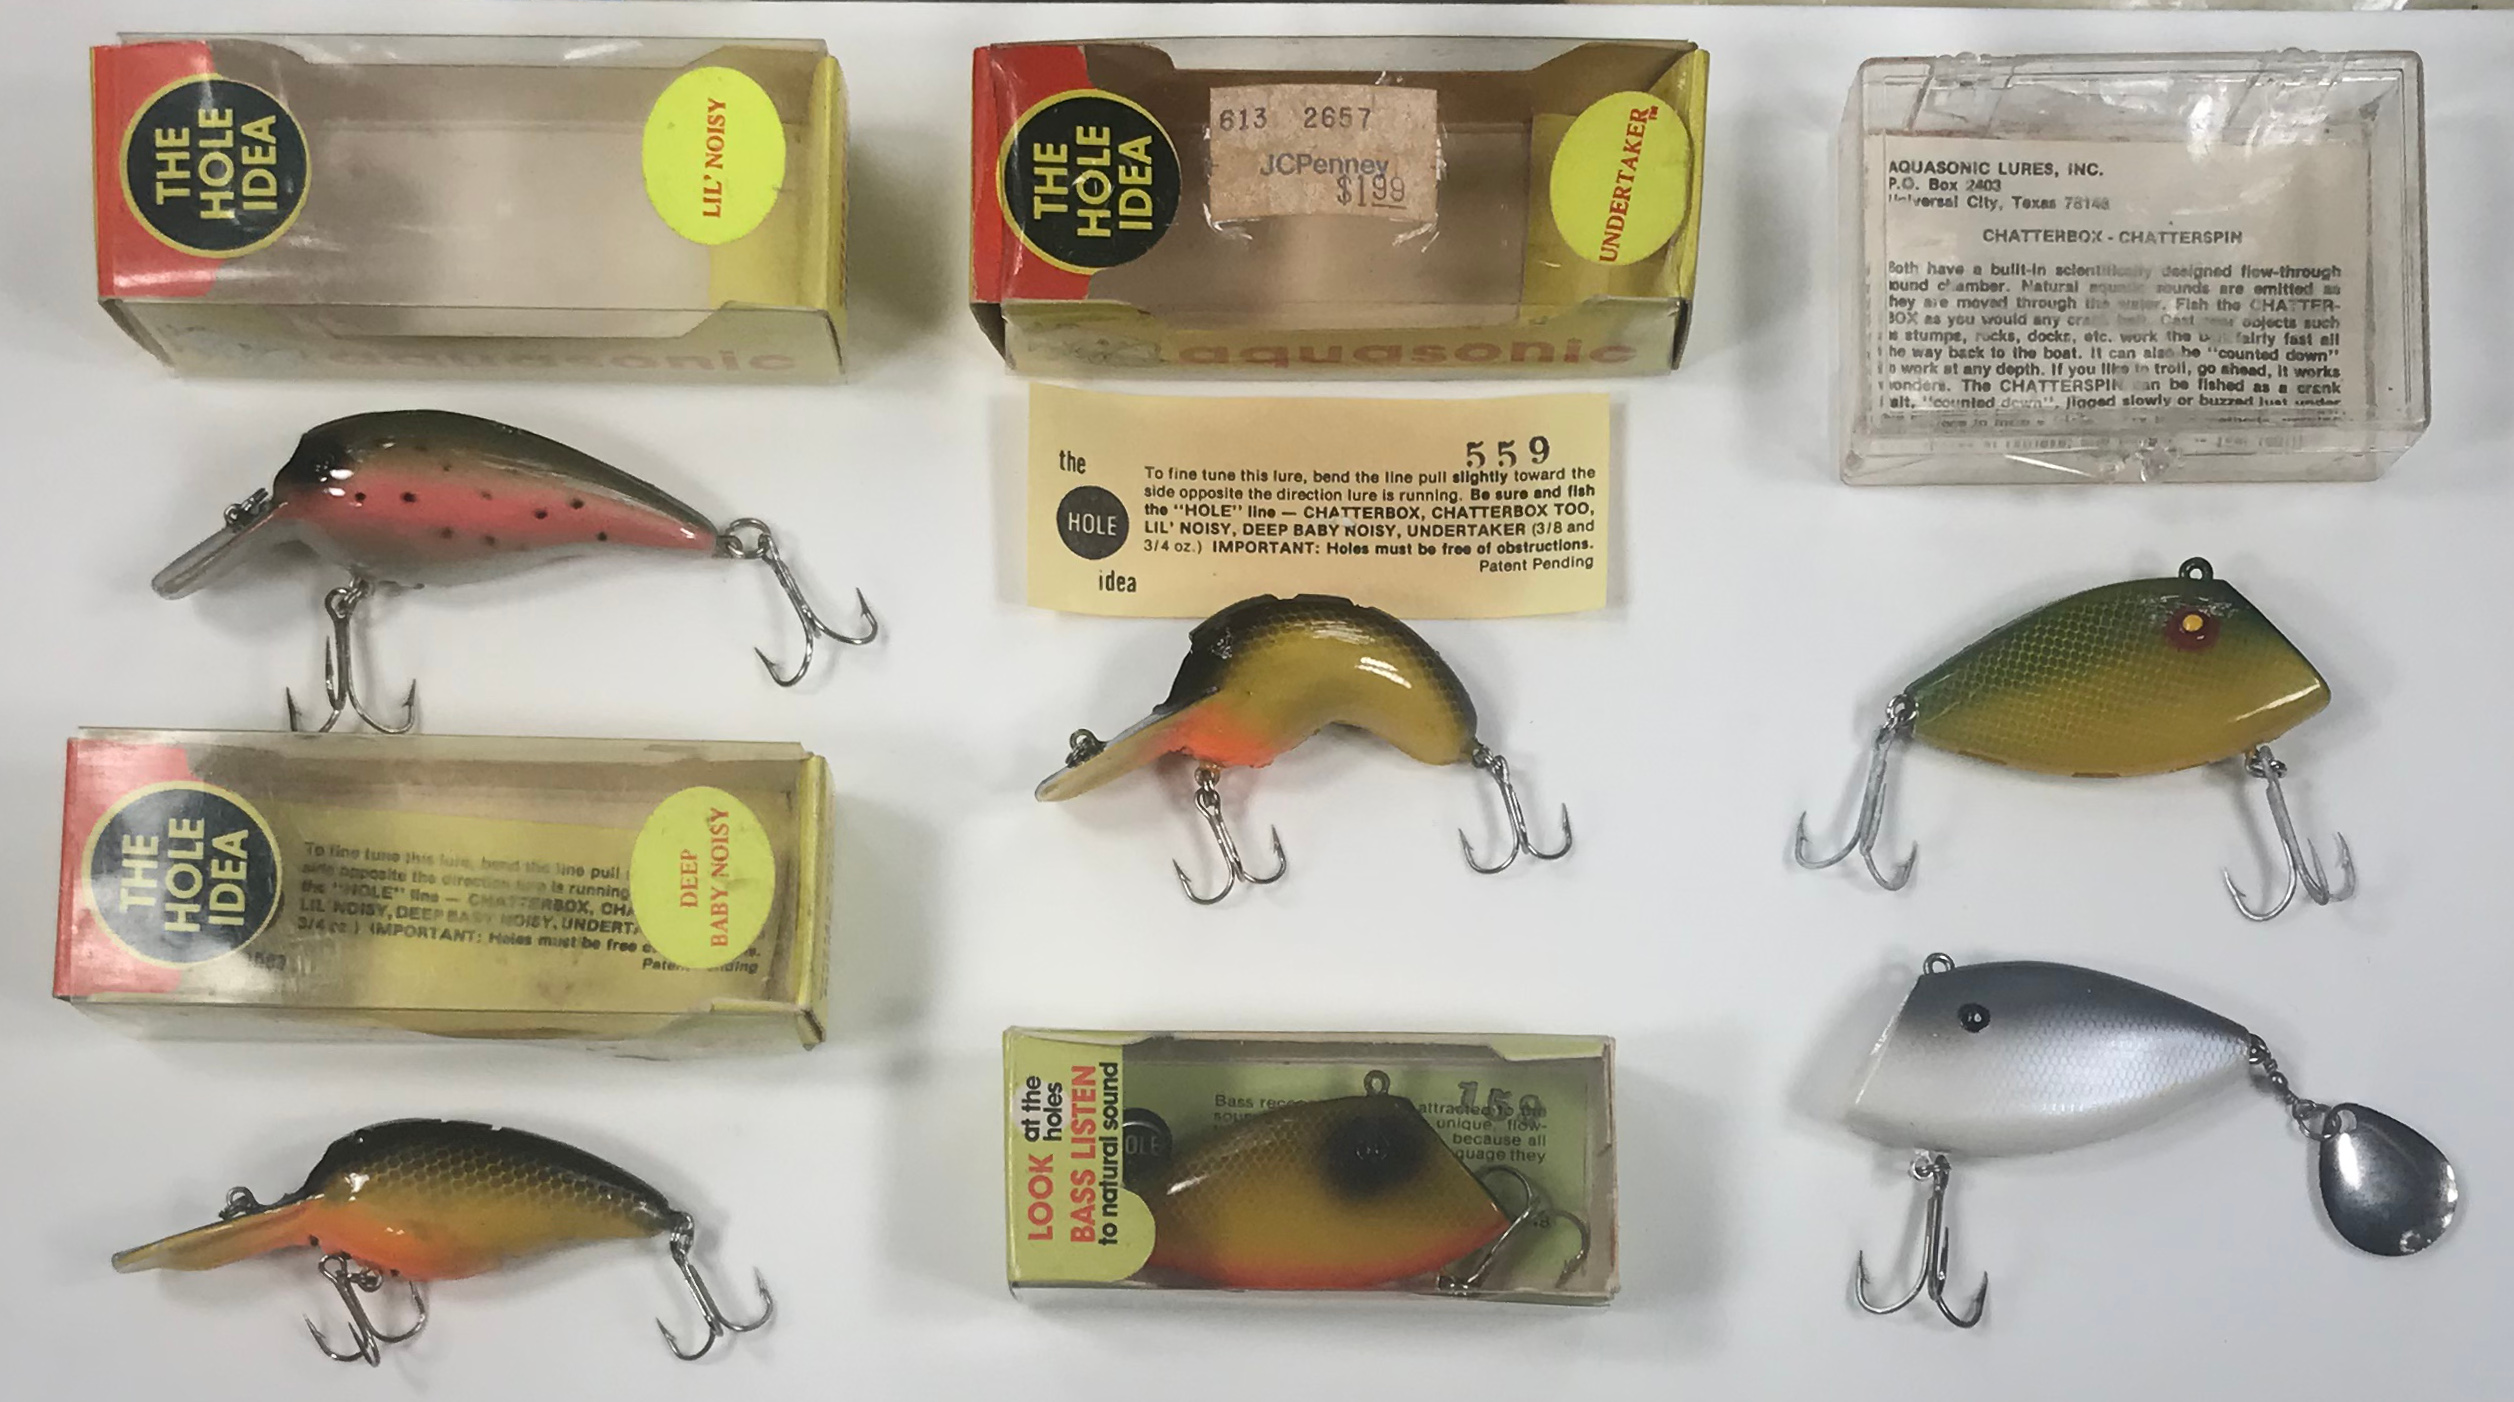 Texas Baits – Some Old Texas Fishing Lures